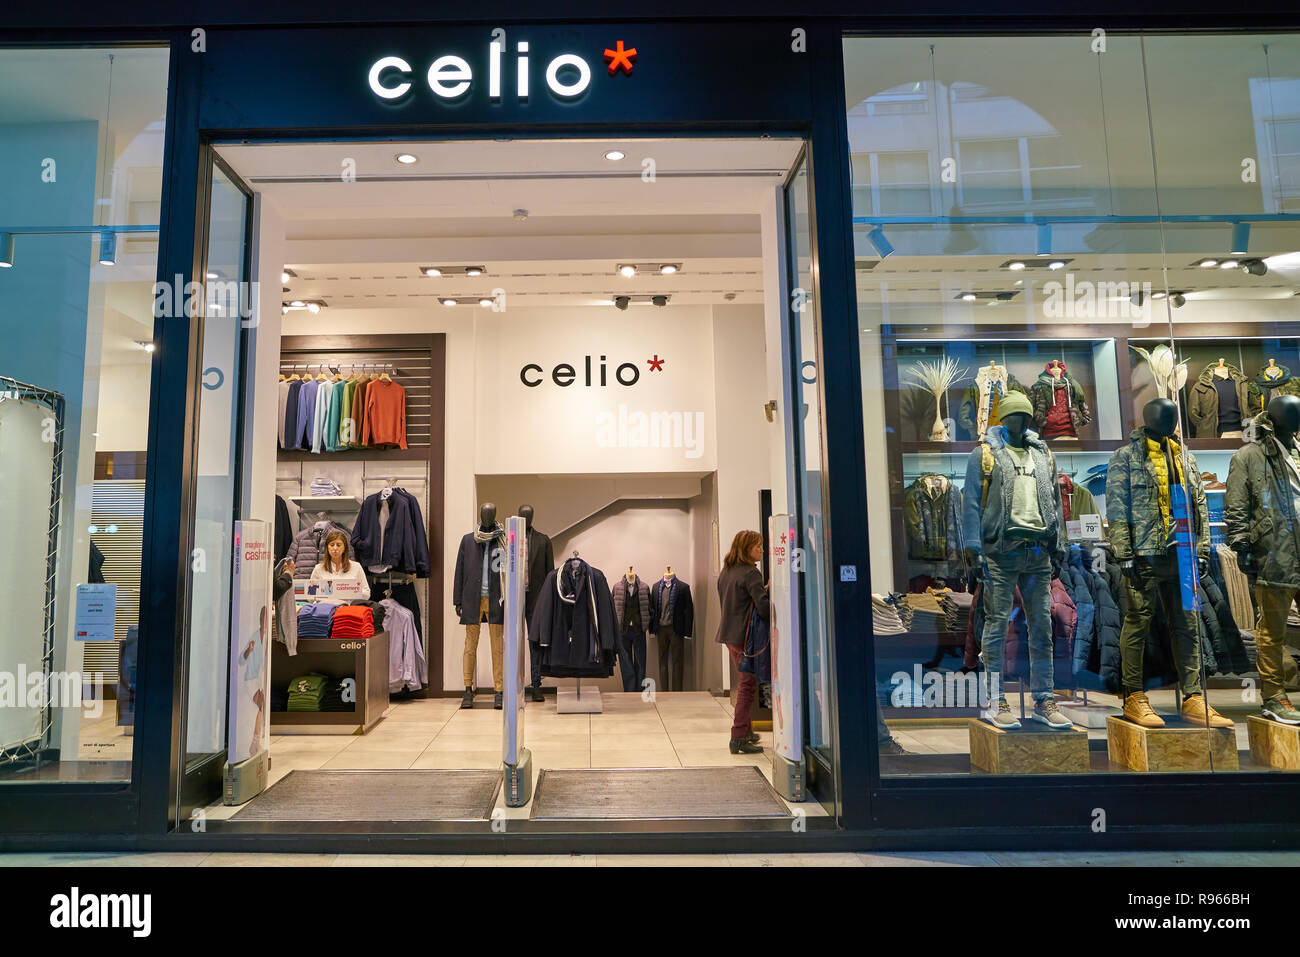 Celio Store High Resolution Stock Photography and Images - Alamy